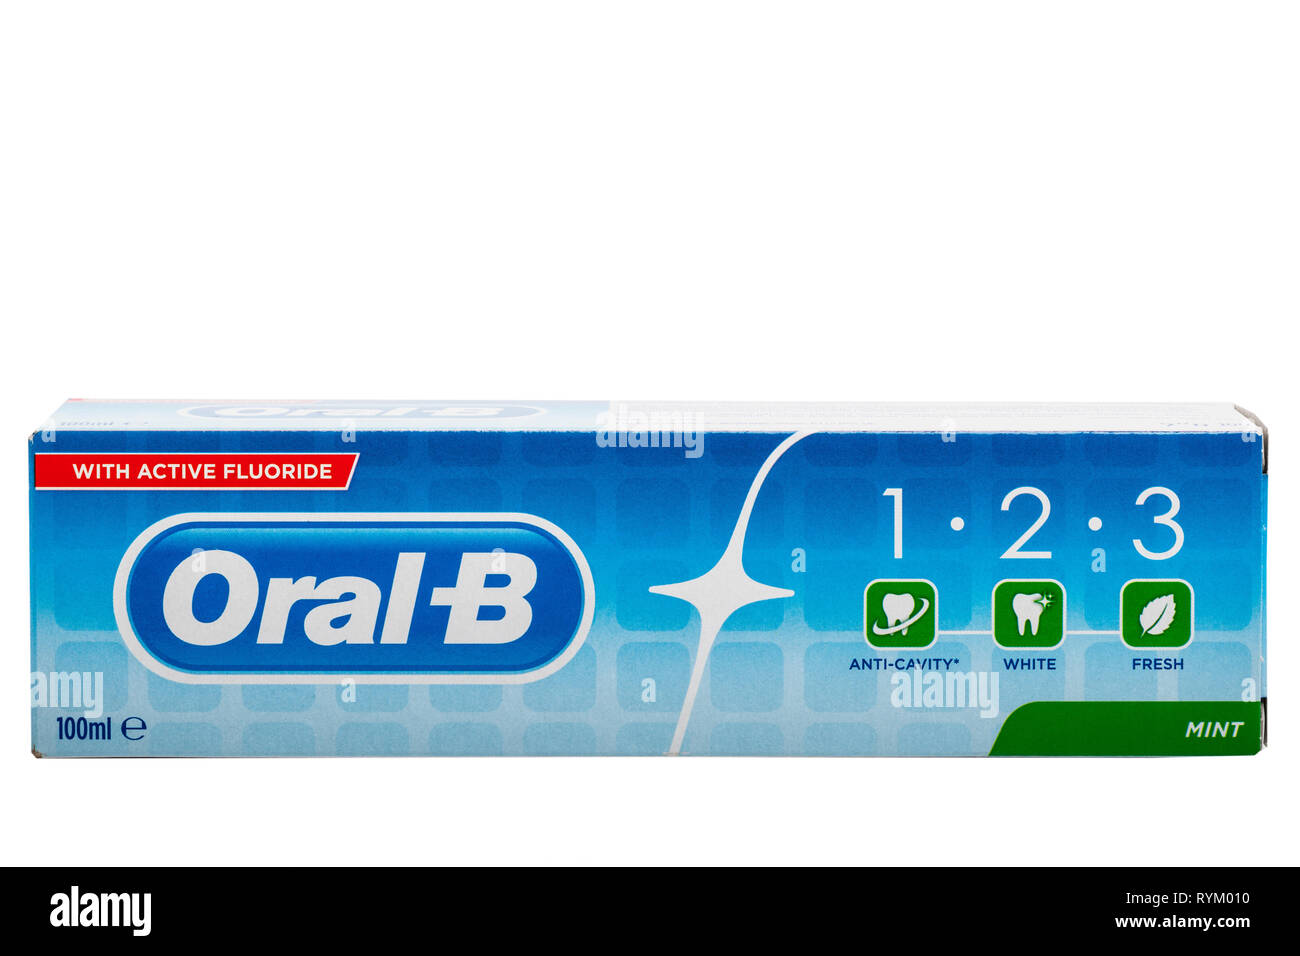 A box of Oral-B mint toothpaste with active flouride on a white background Stock Photo